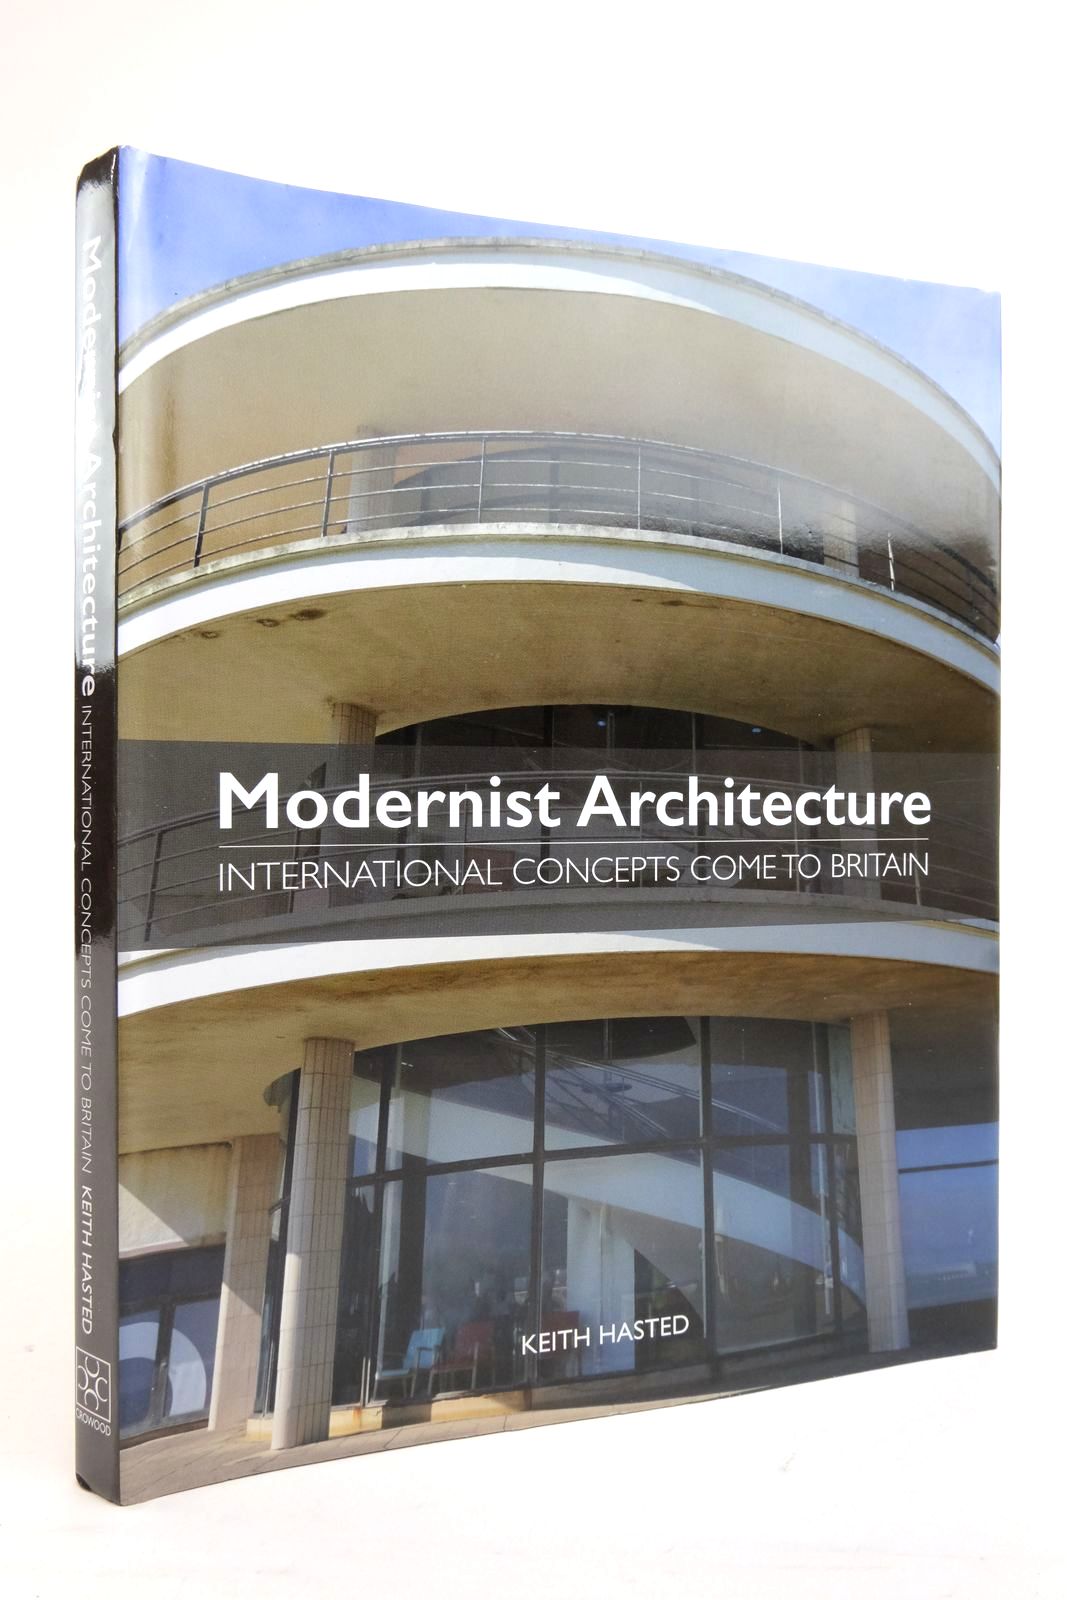 Photo of MODERNIST ARCHITECTURE: INTERNATIONAL CONCEPTS COME TO BRITAIN written by Hasted, Keith published by The Crowood Press (STOCK CODE: 2136251)  for sale by Stella & Rose's Books